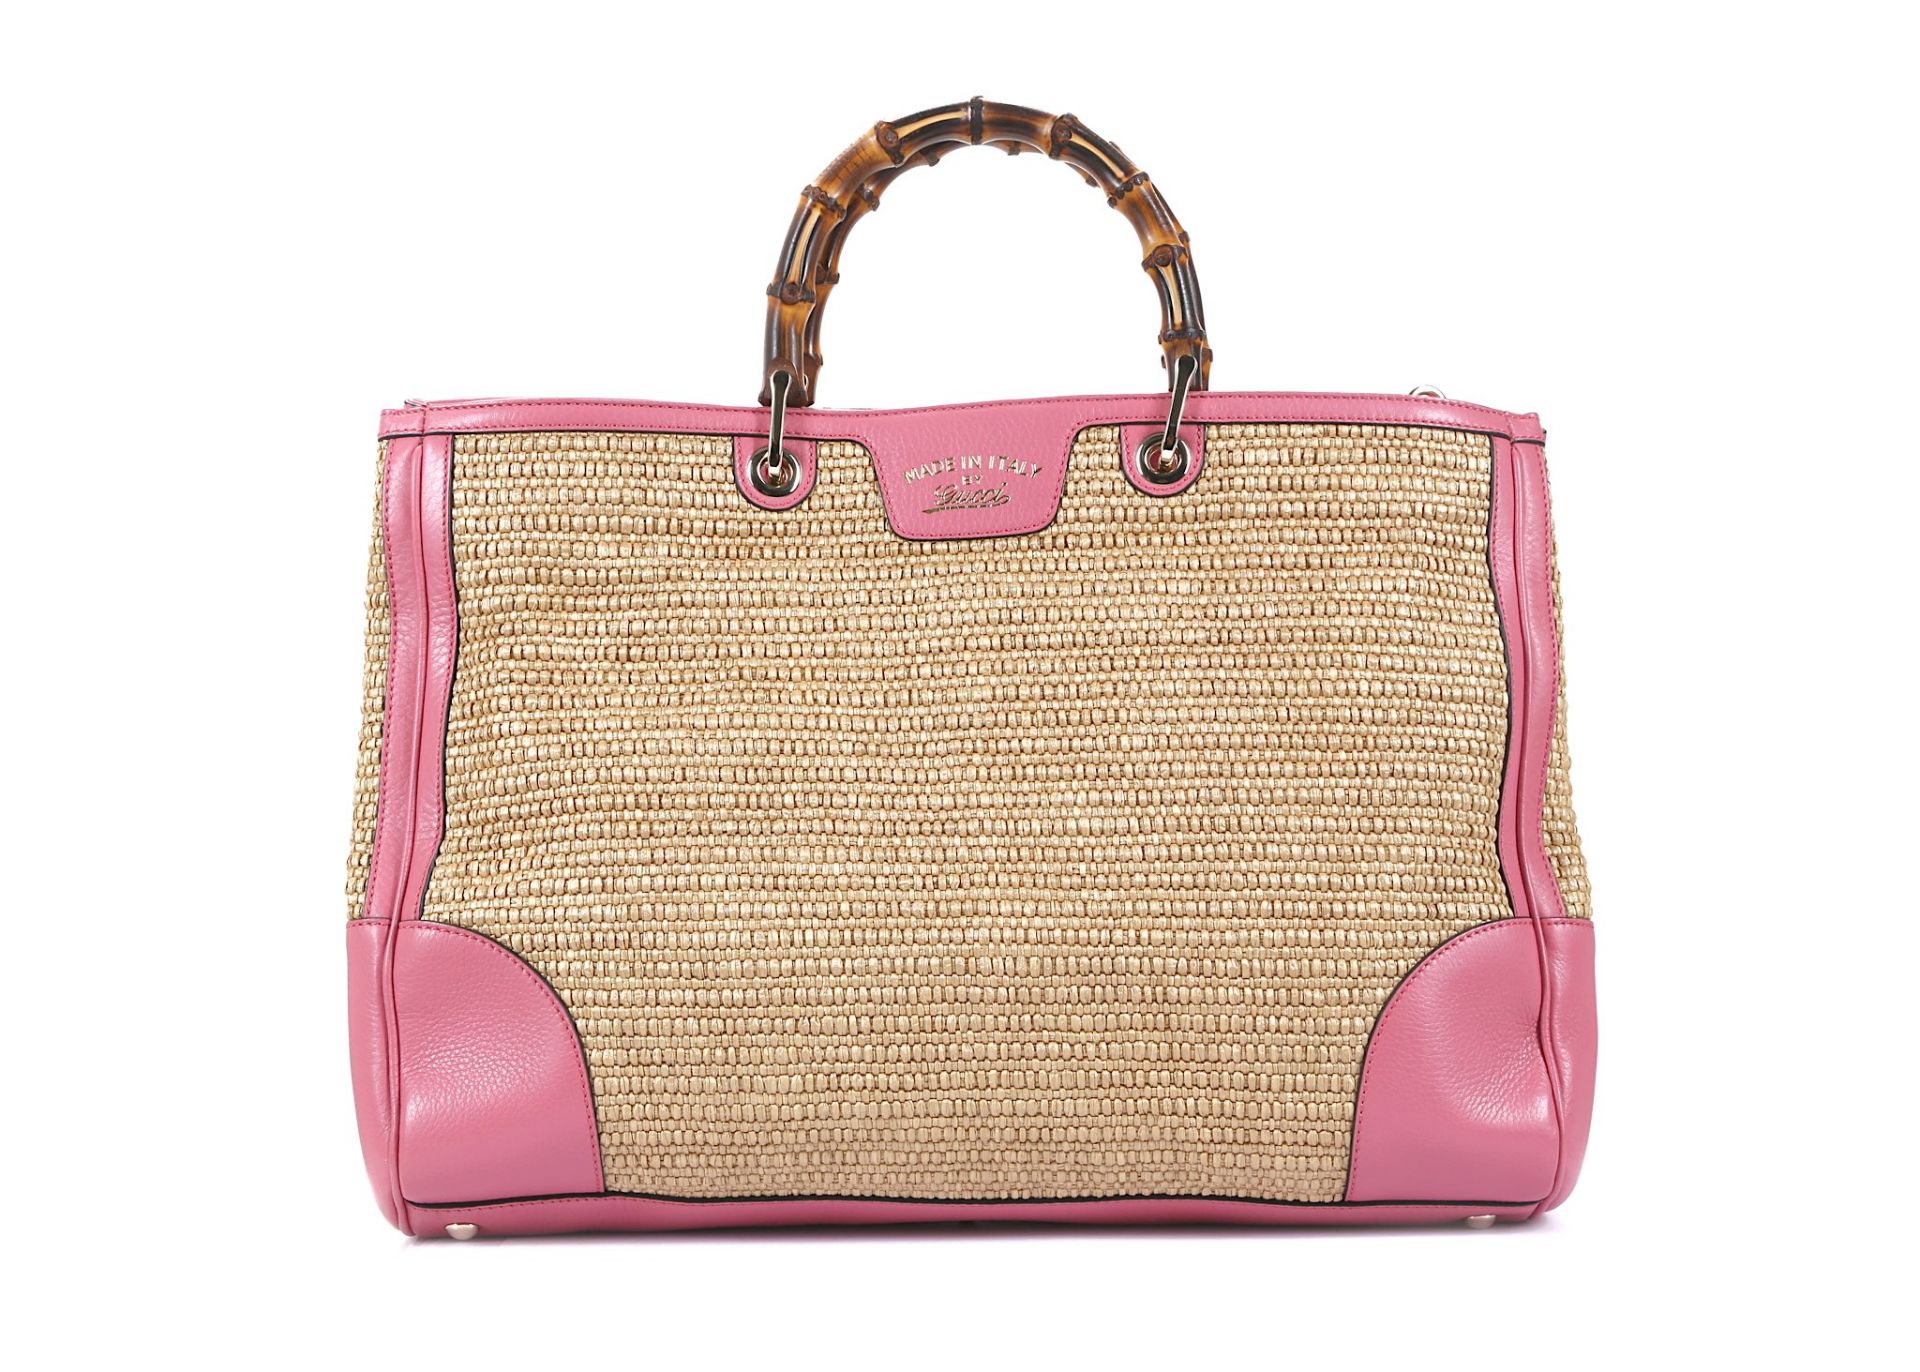 Gucci Pink Straw Bamboo Large Shopper Tote, pink leather and woven straw with bamboo handles, gold